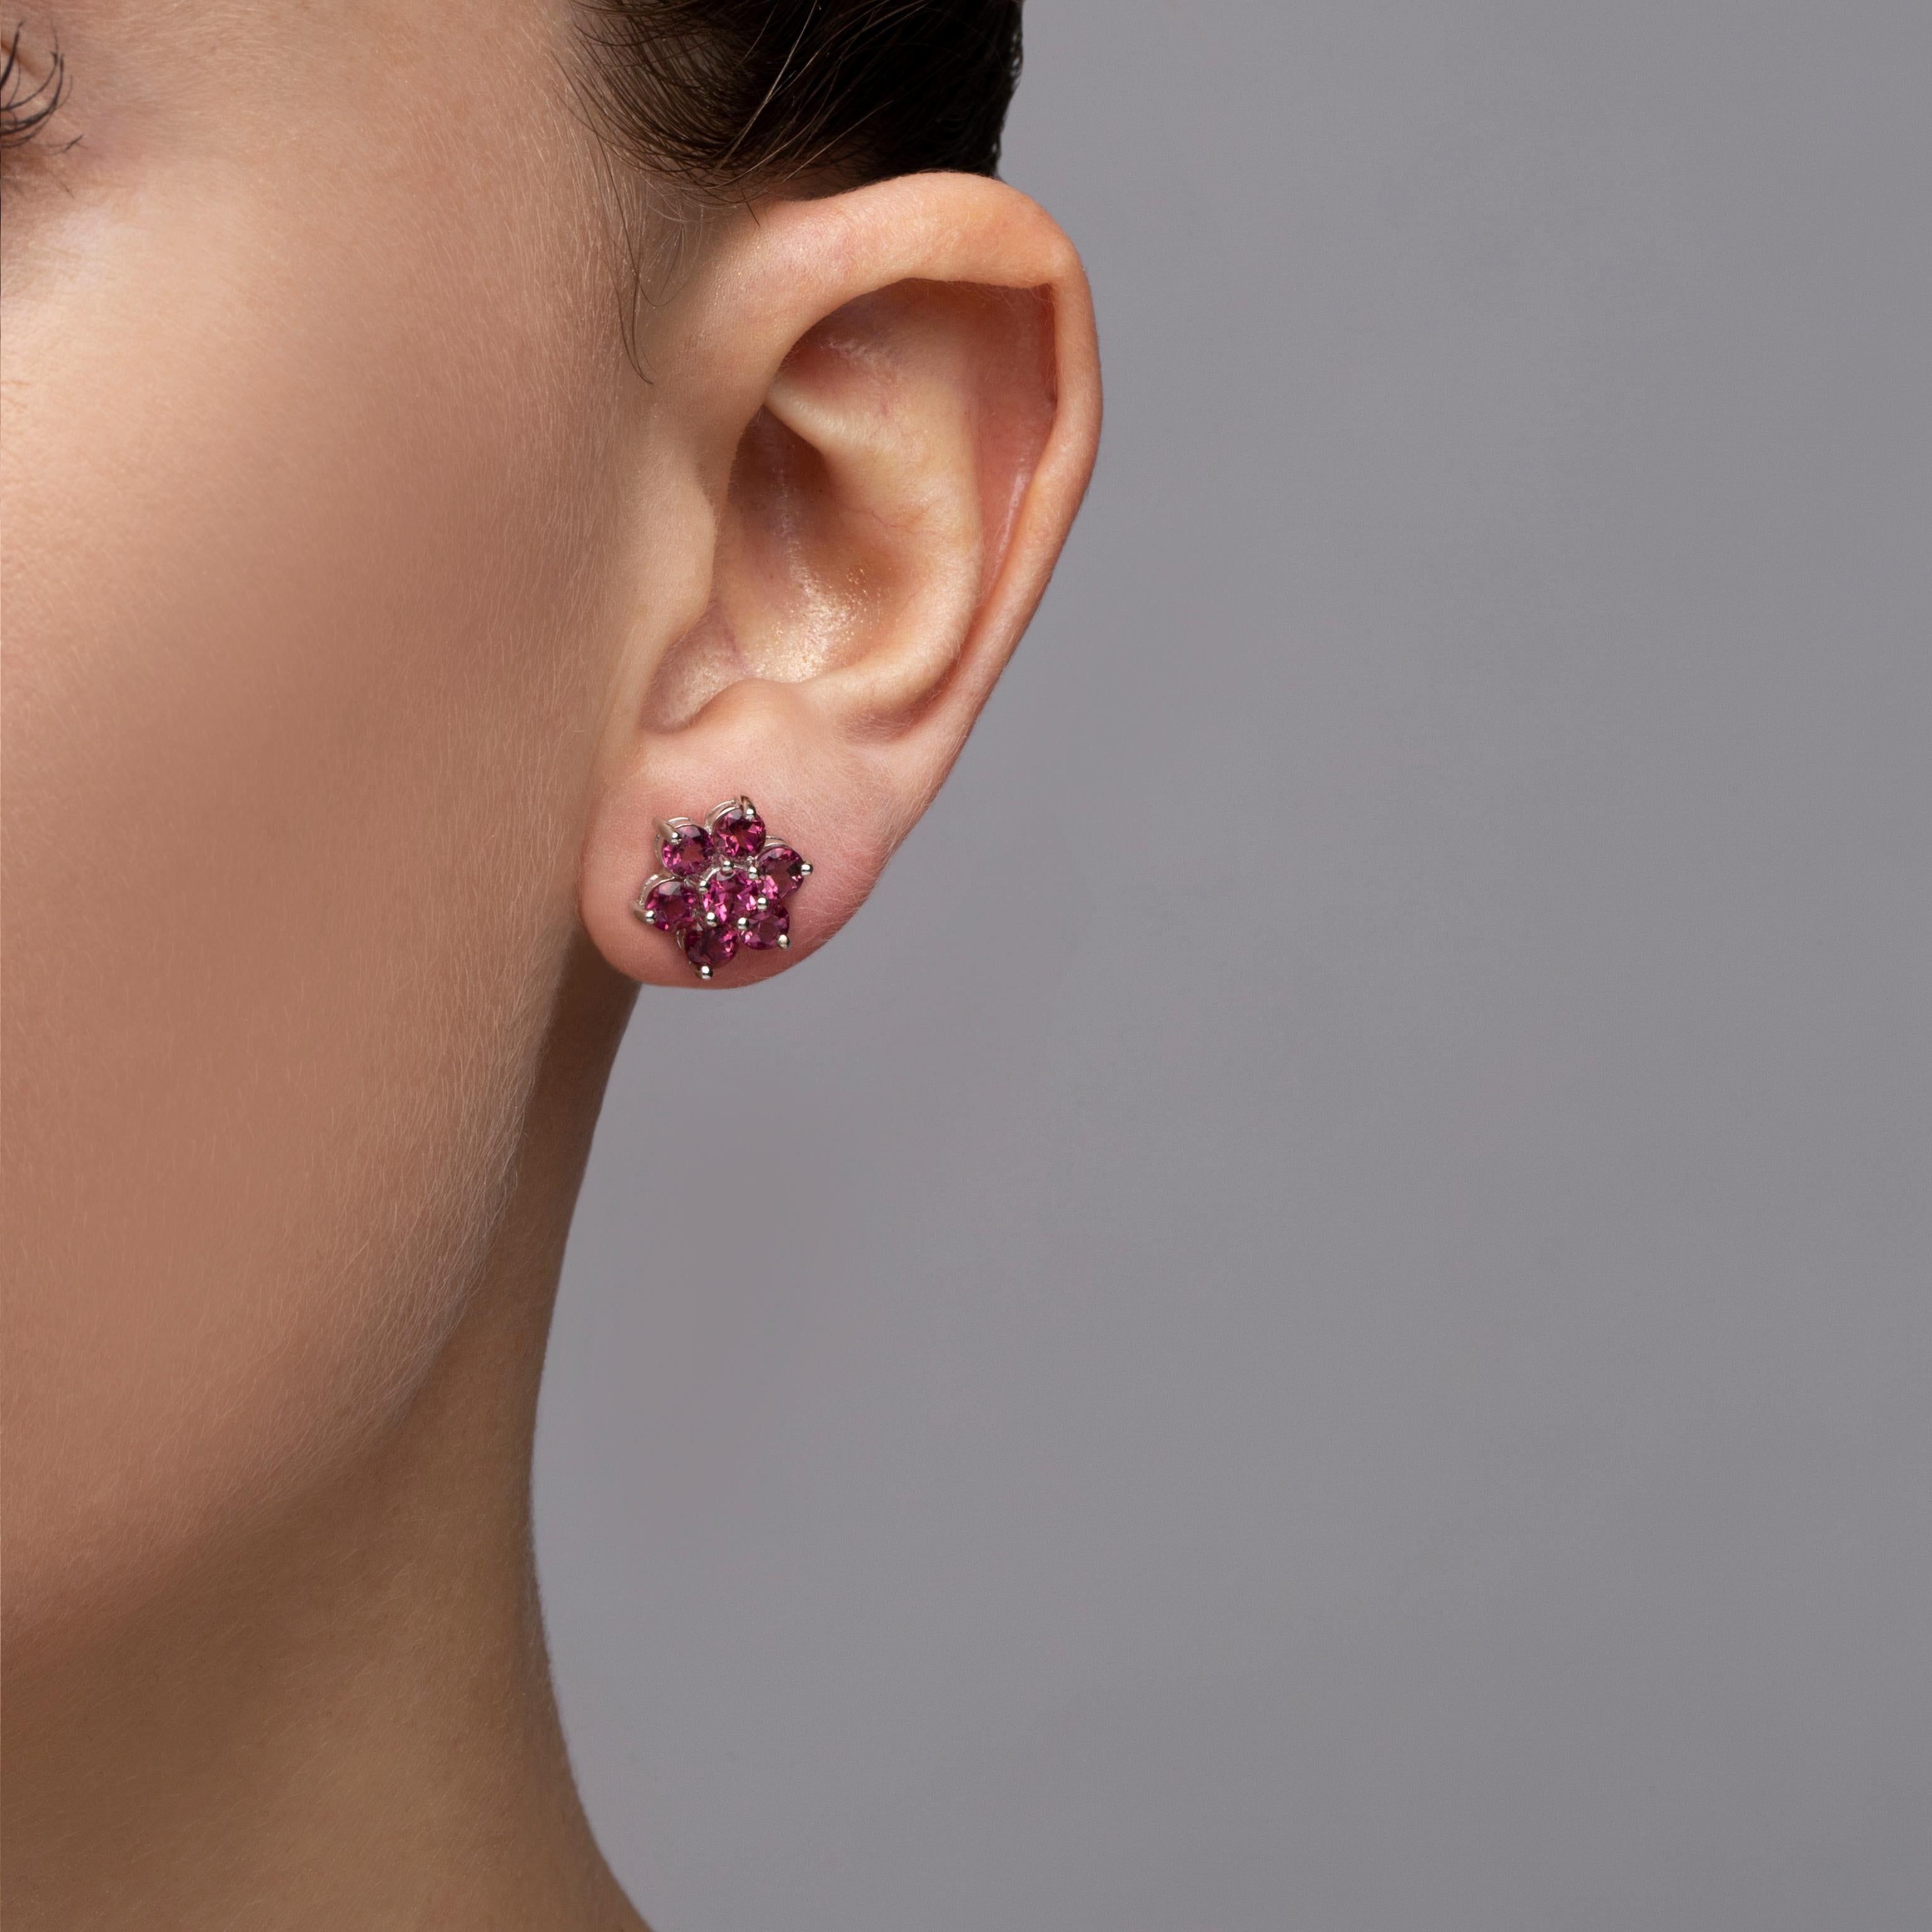 Alex Jona design collection, hand crafted in Italy, 18 karat white gold stud earrings, set with 7 rubelite tourmalines each, weighing 3,61 carats in total. 

Alex Jona jewels stand out, not only for their special design and for the excellent quality